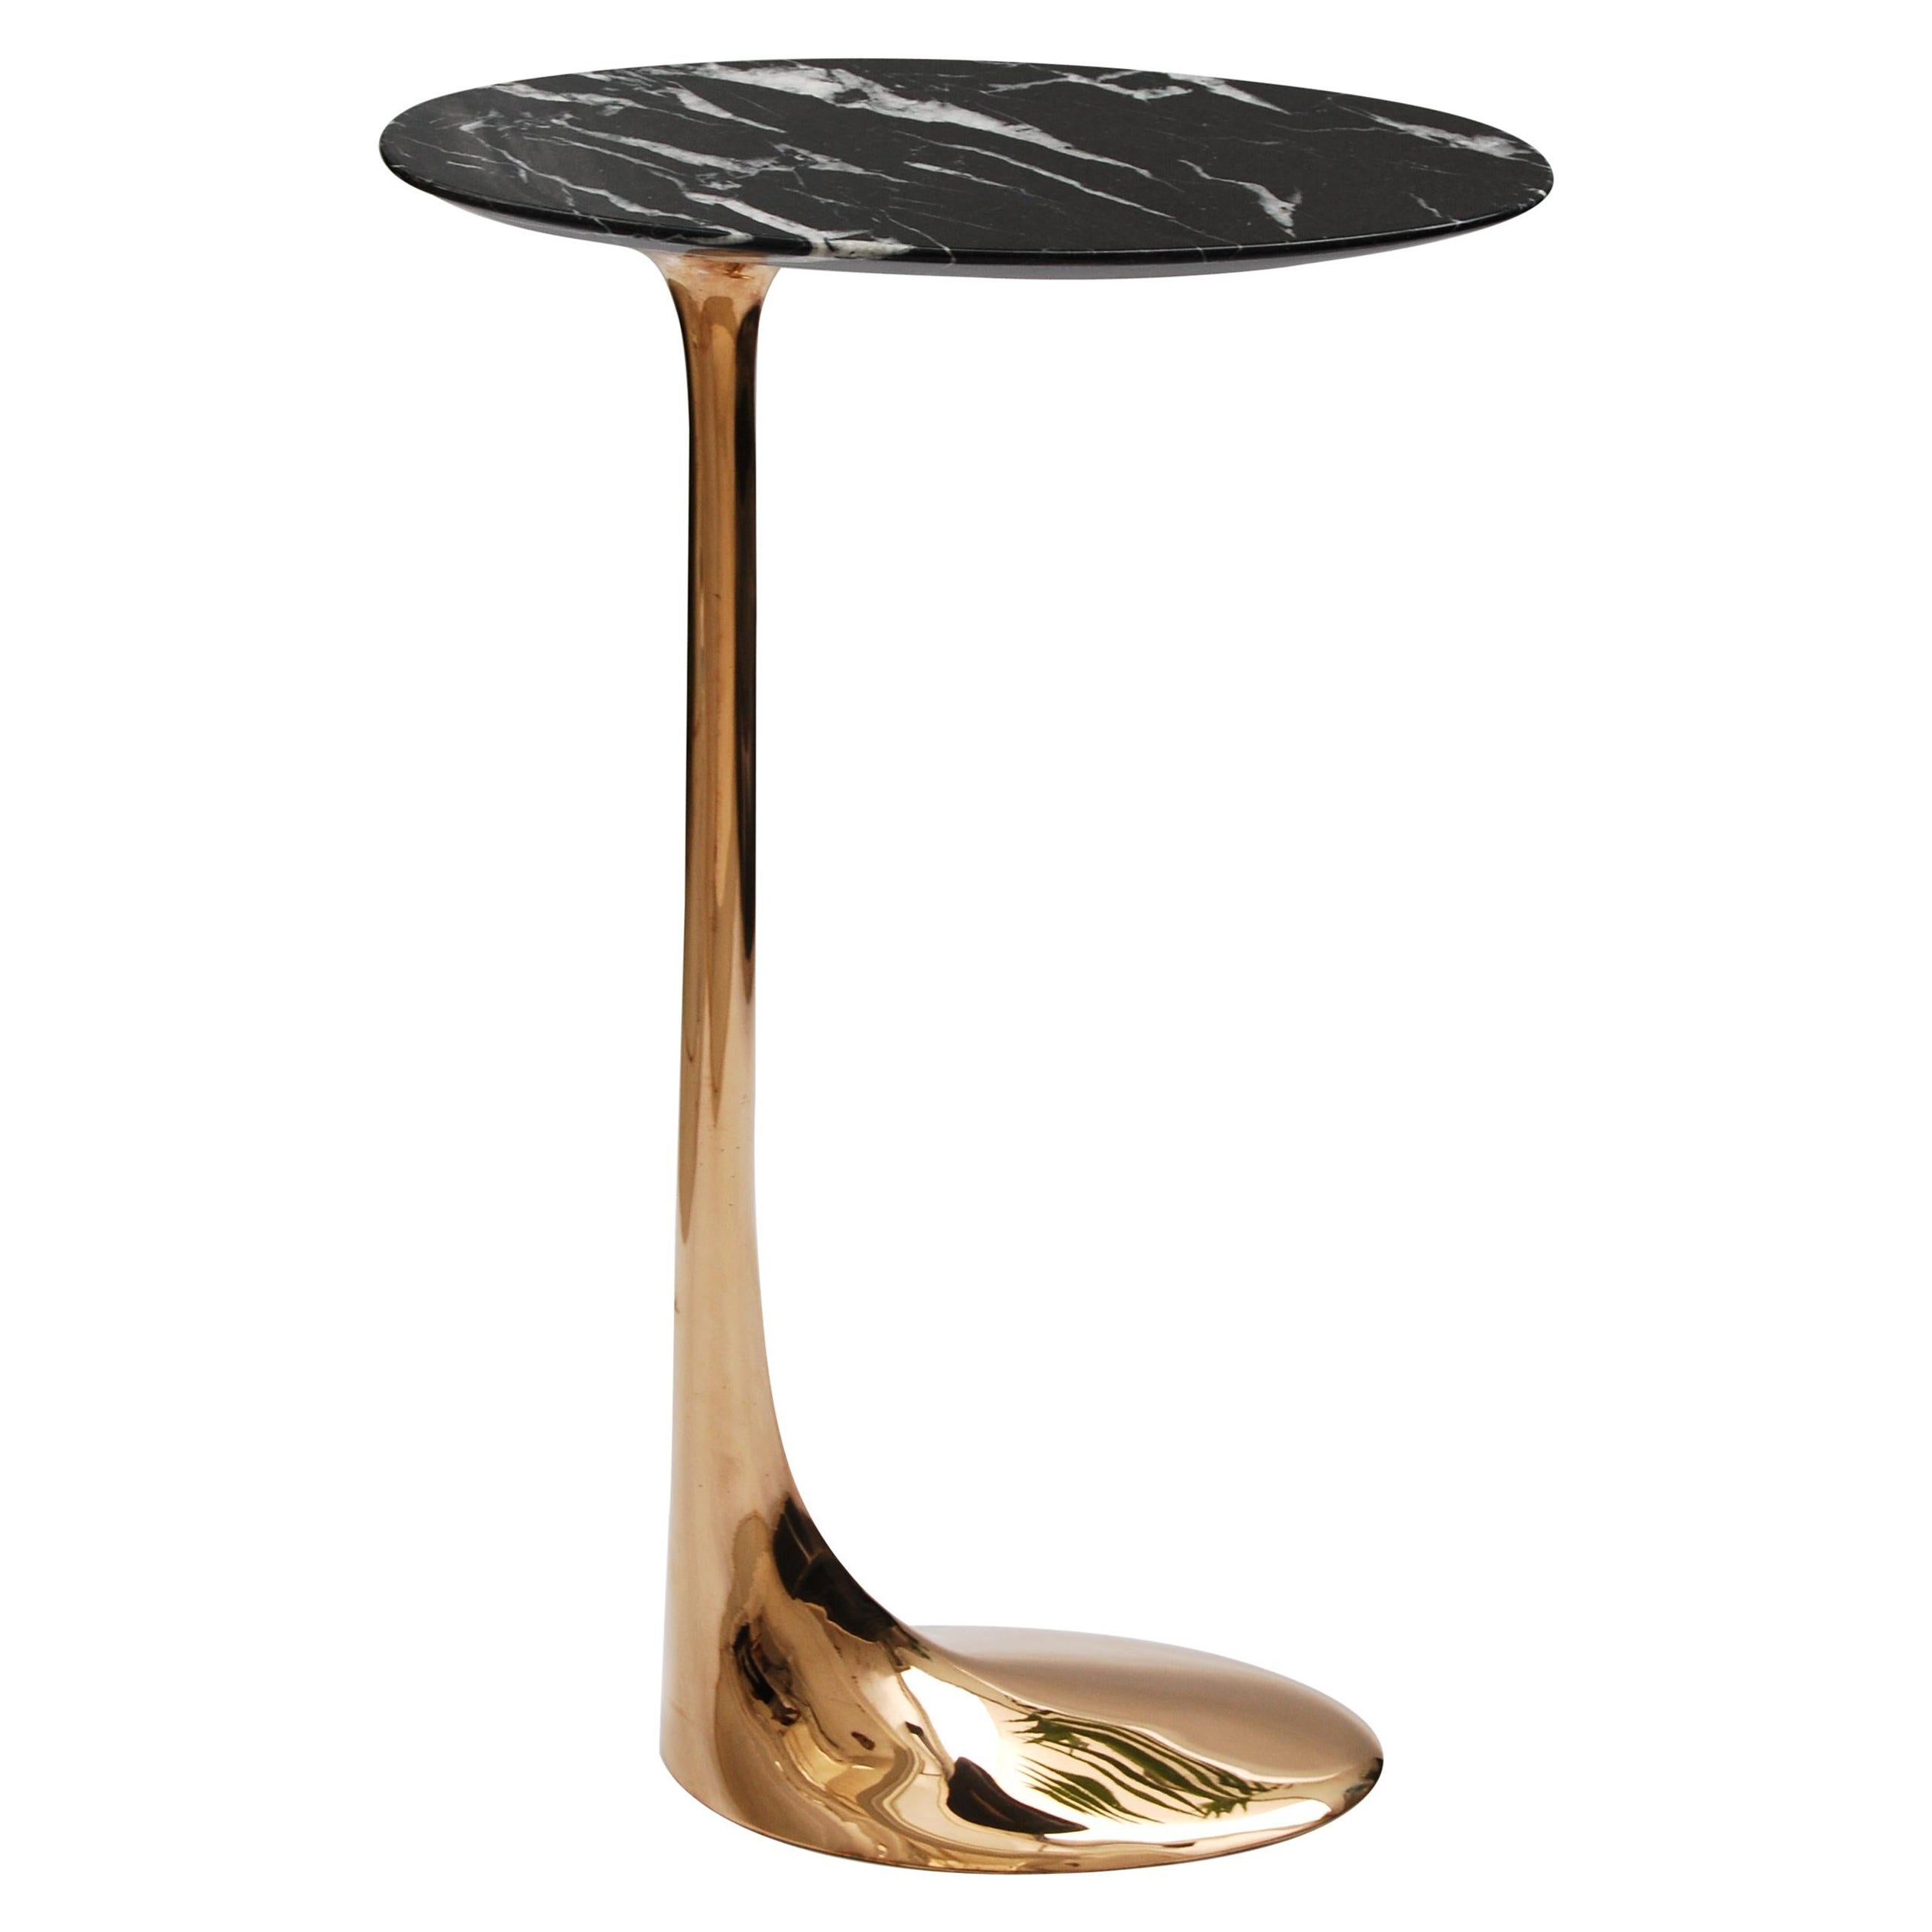 Polished Bronze Table with Marquina Marble Top by Fakasaka Design